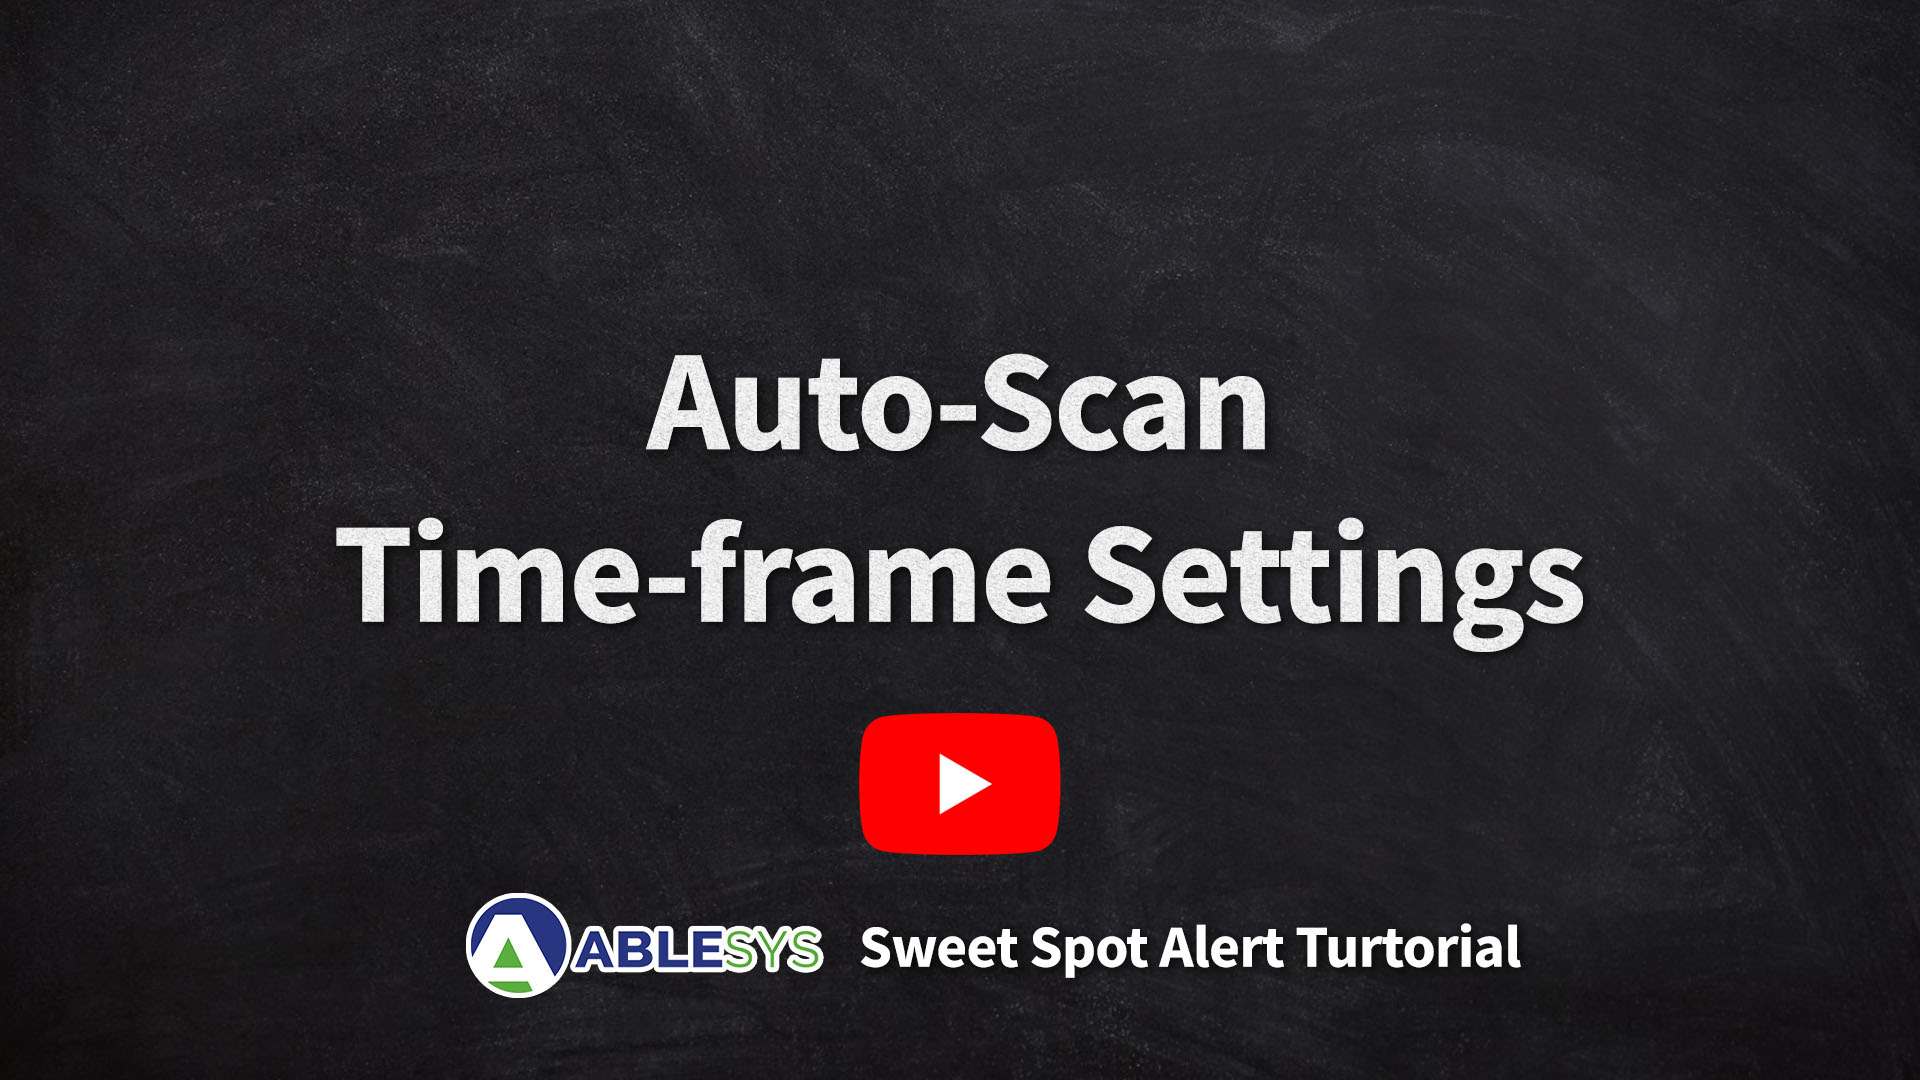 Auto-Scan Time-frame Settings